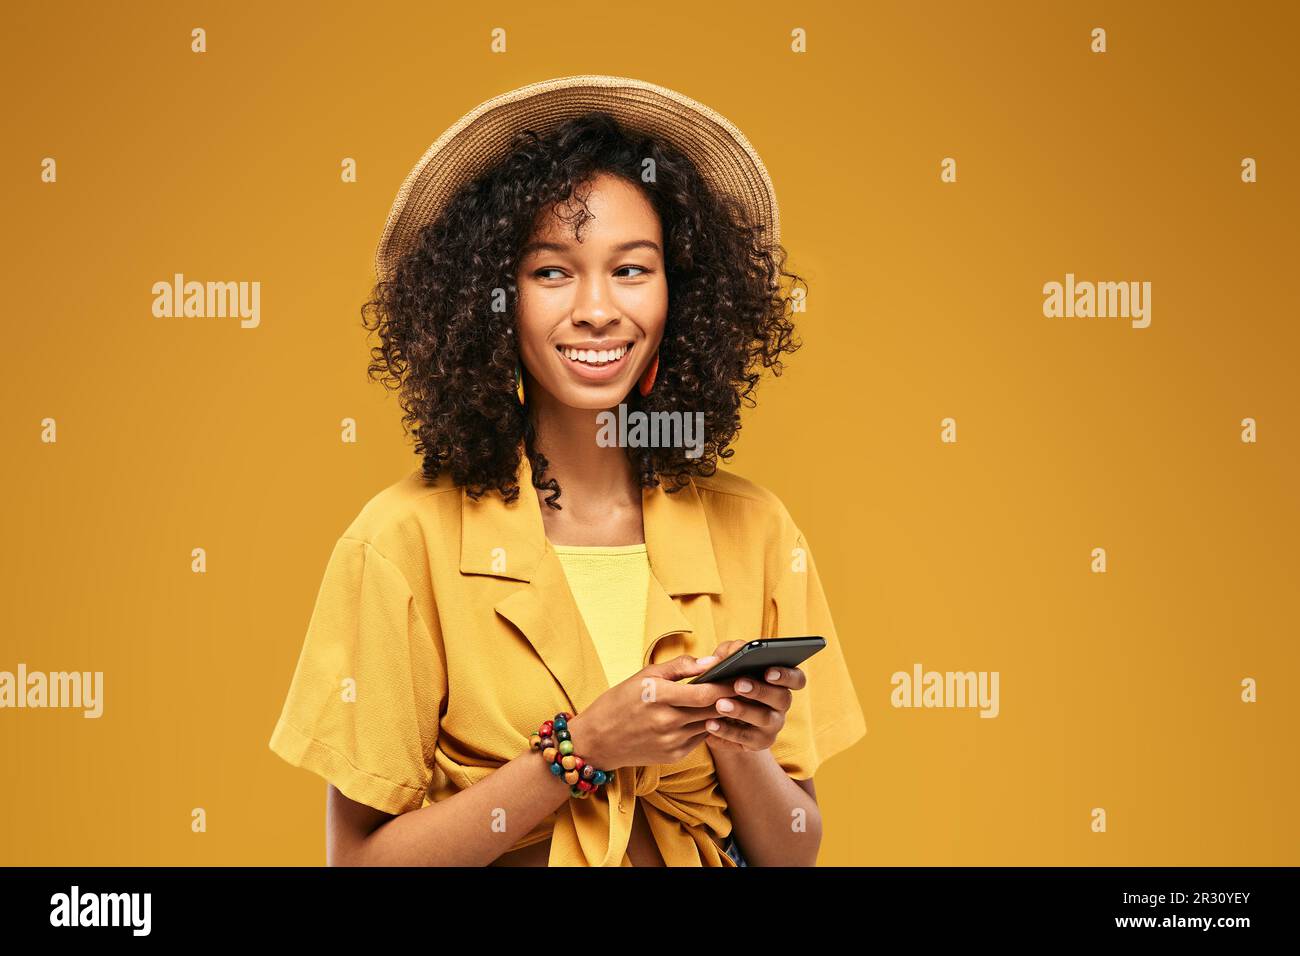 African American woman writing message on her smartphone and having fun, dressed straw hat and youth clothes, on yellow background Stock Photo